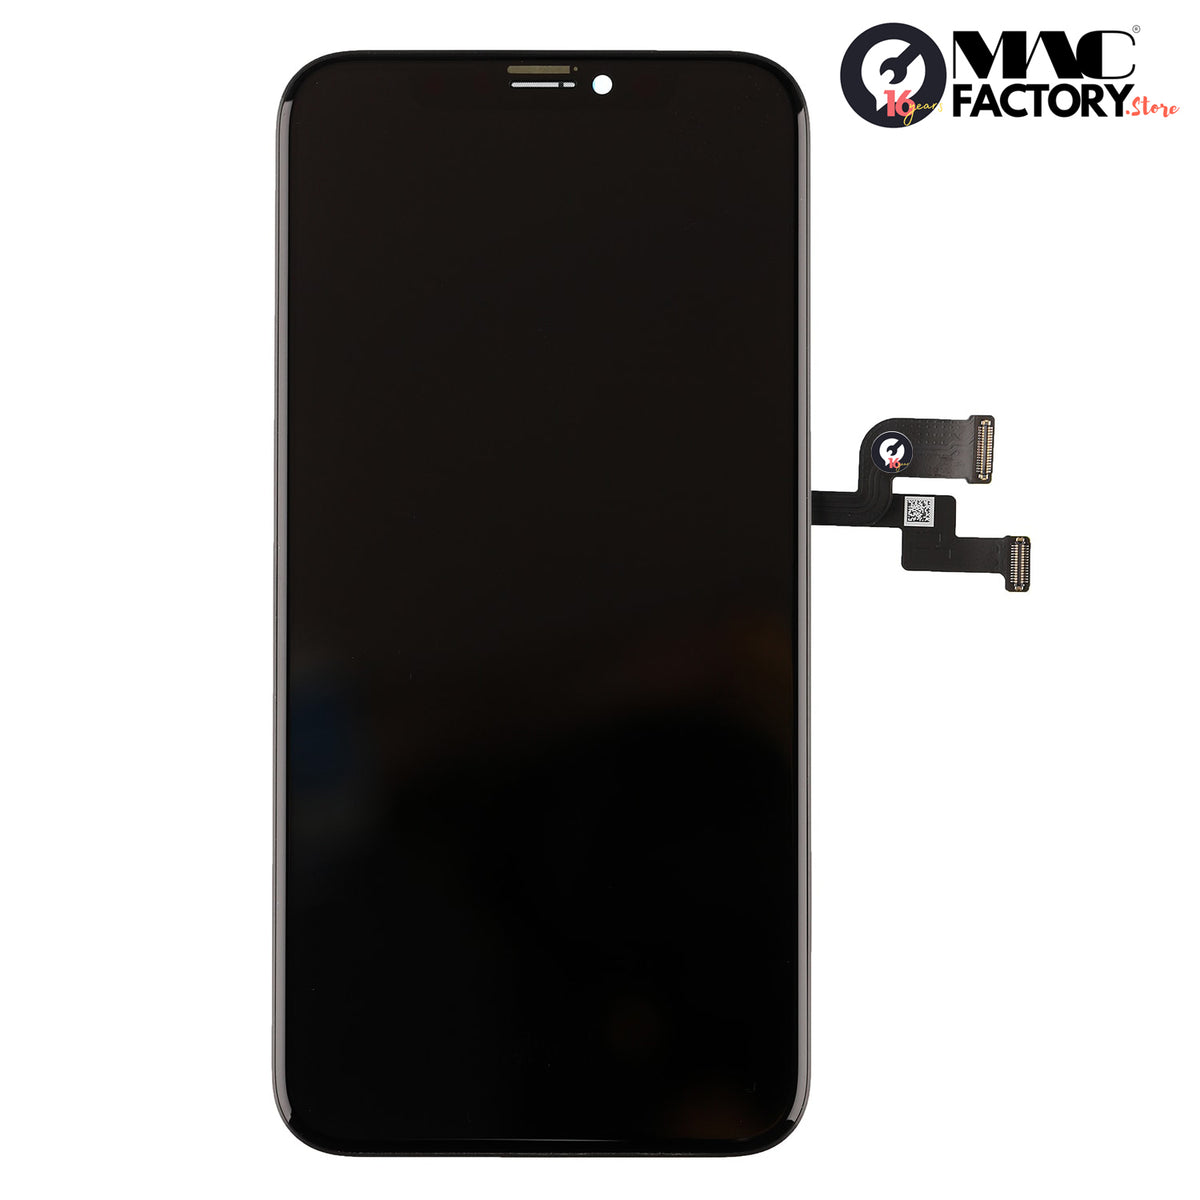 BLACK OLED SCREEN DIGITIZER ASSEMBLY FOR IPHONE X